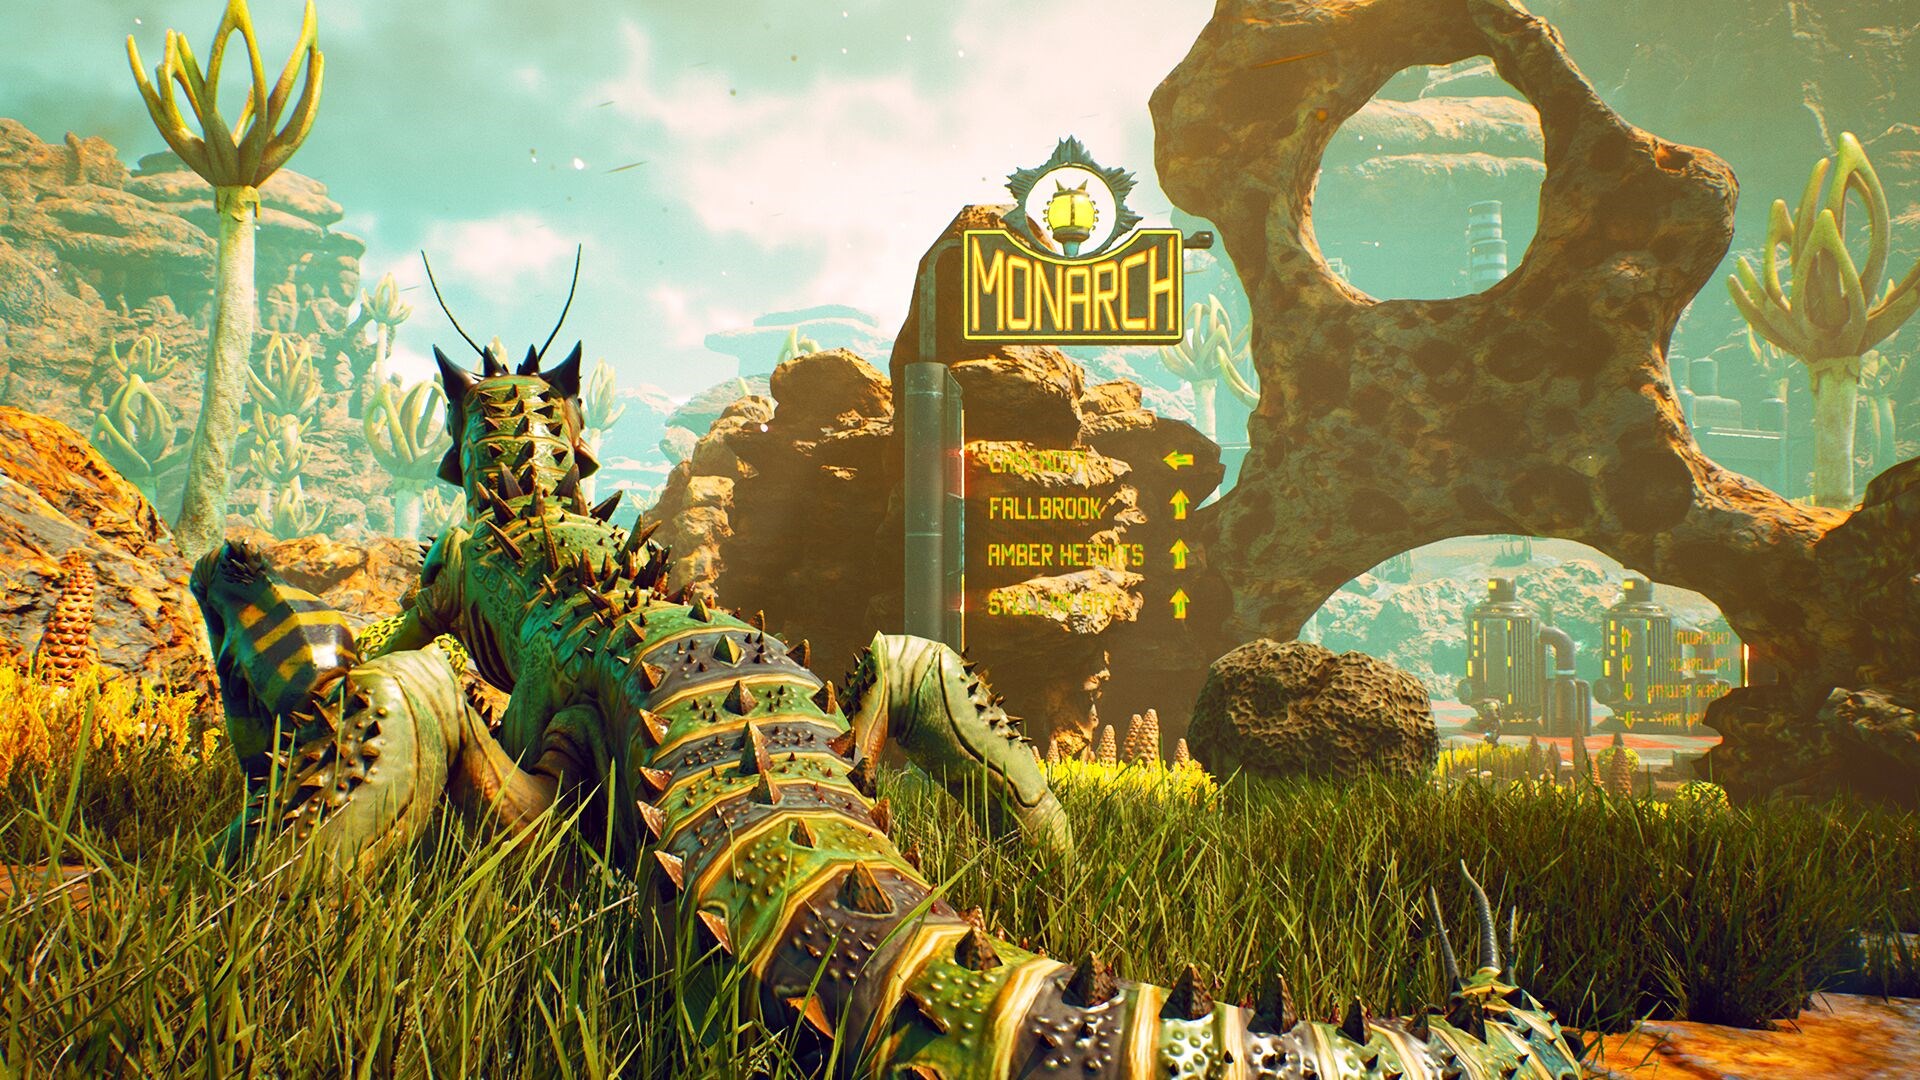 the outer worlds xbox one price